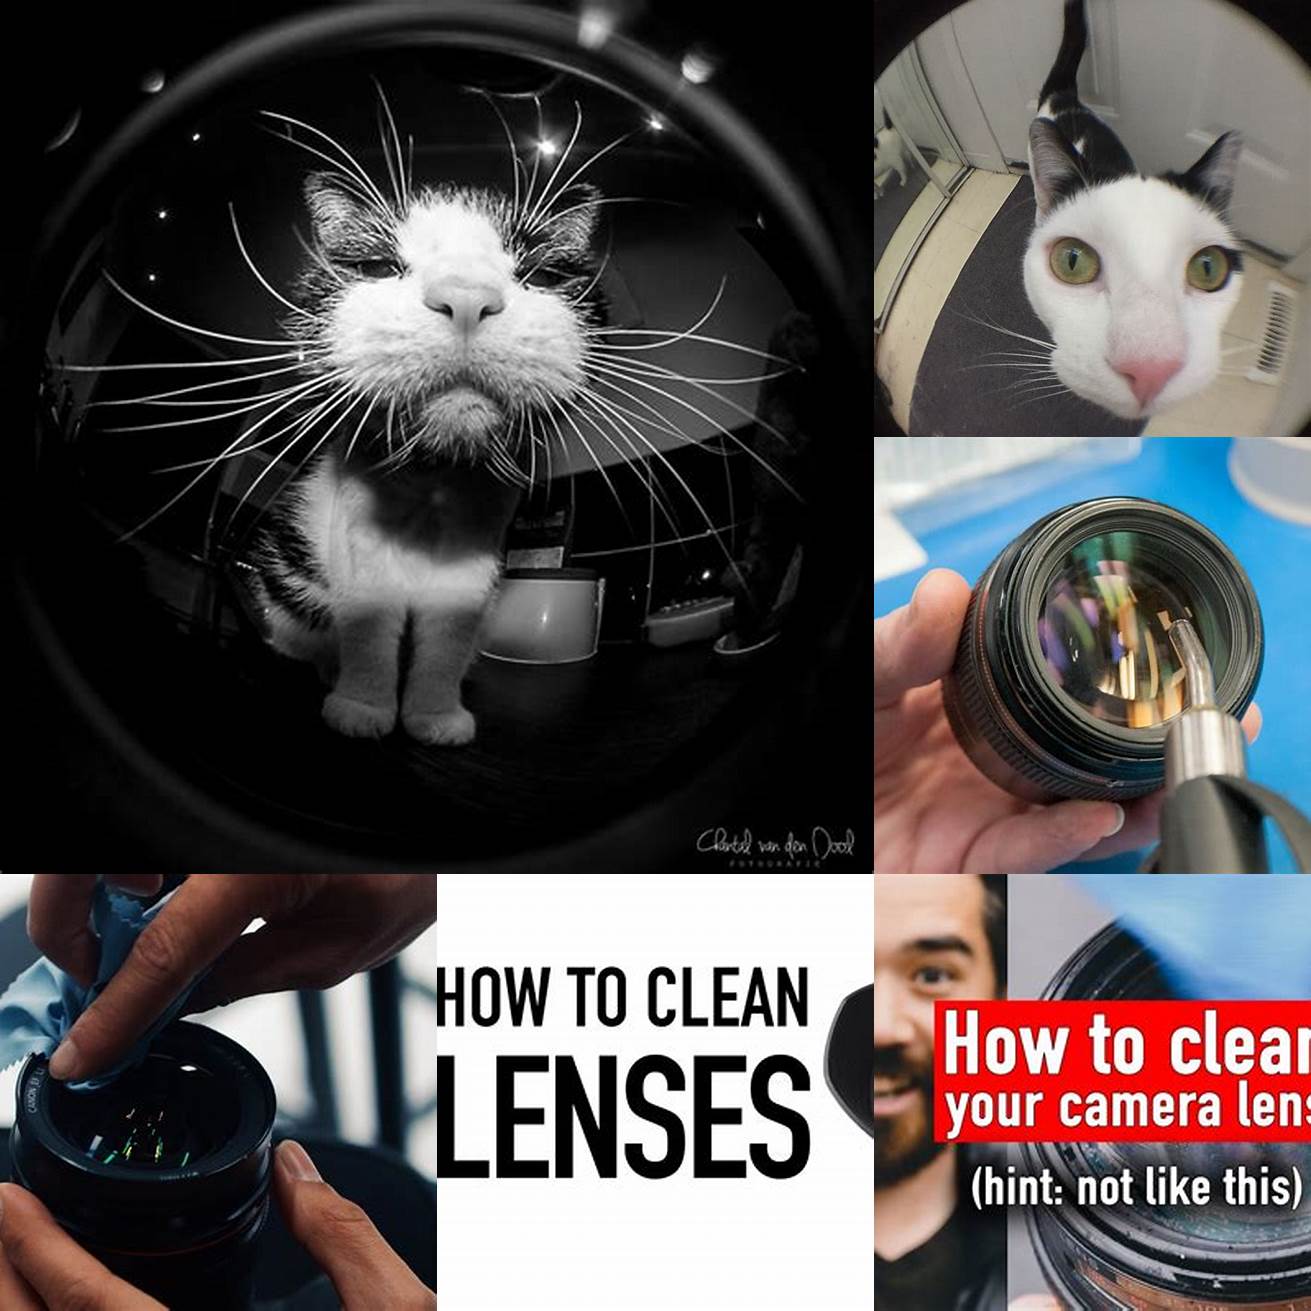 Clean the lens daily